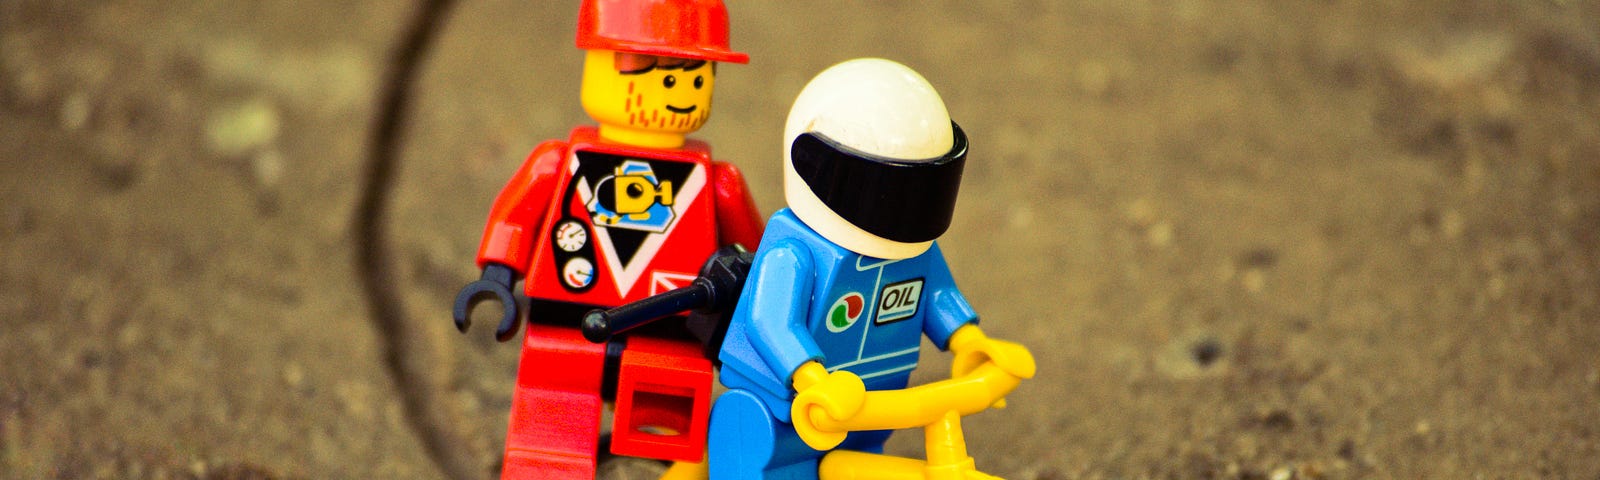 Two Lego man riding on a Lego bicycly. One is driving the other sits on the carrier.